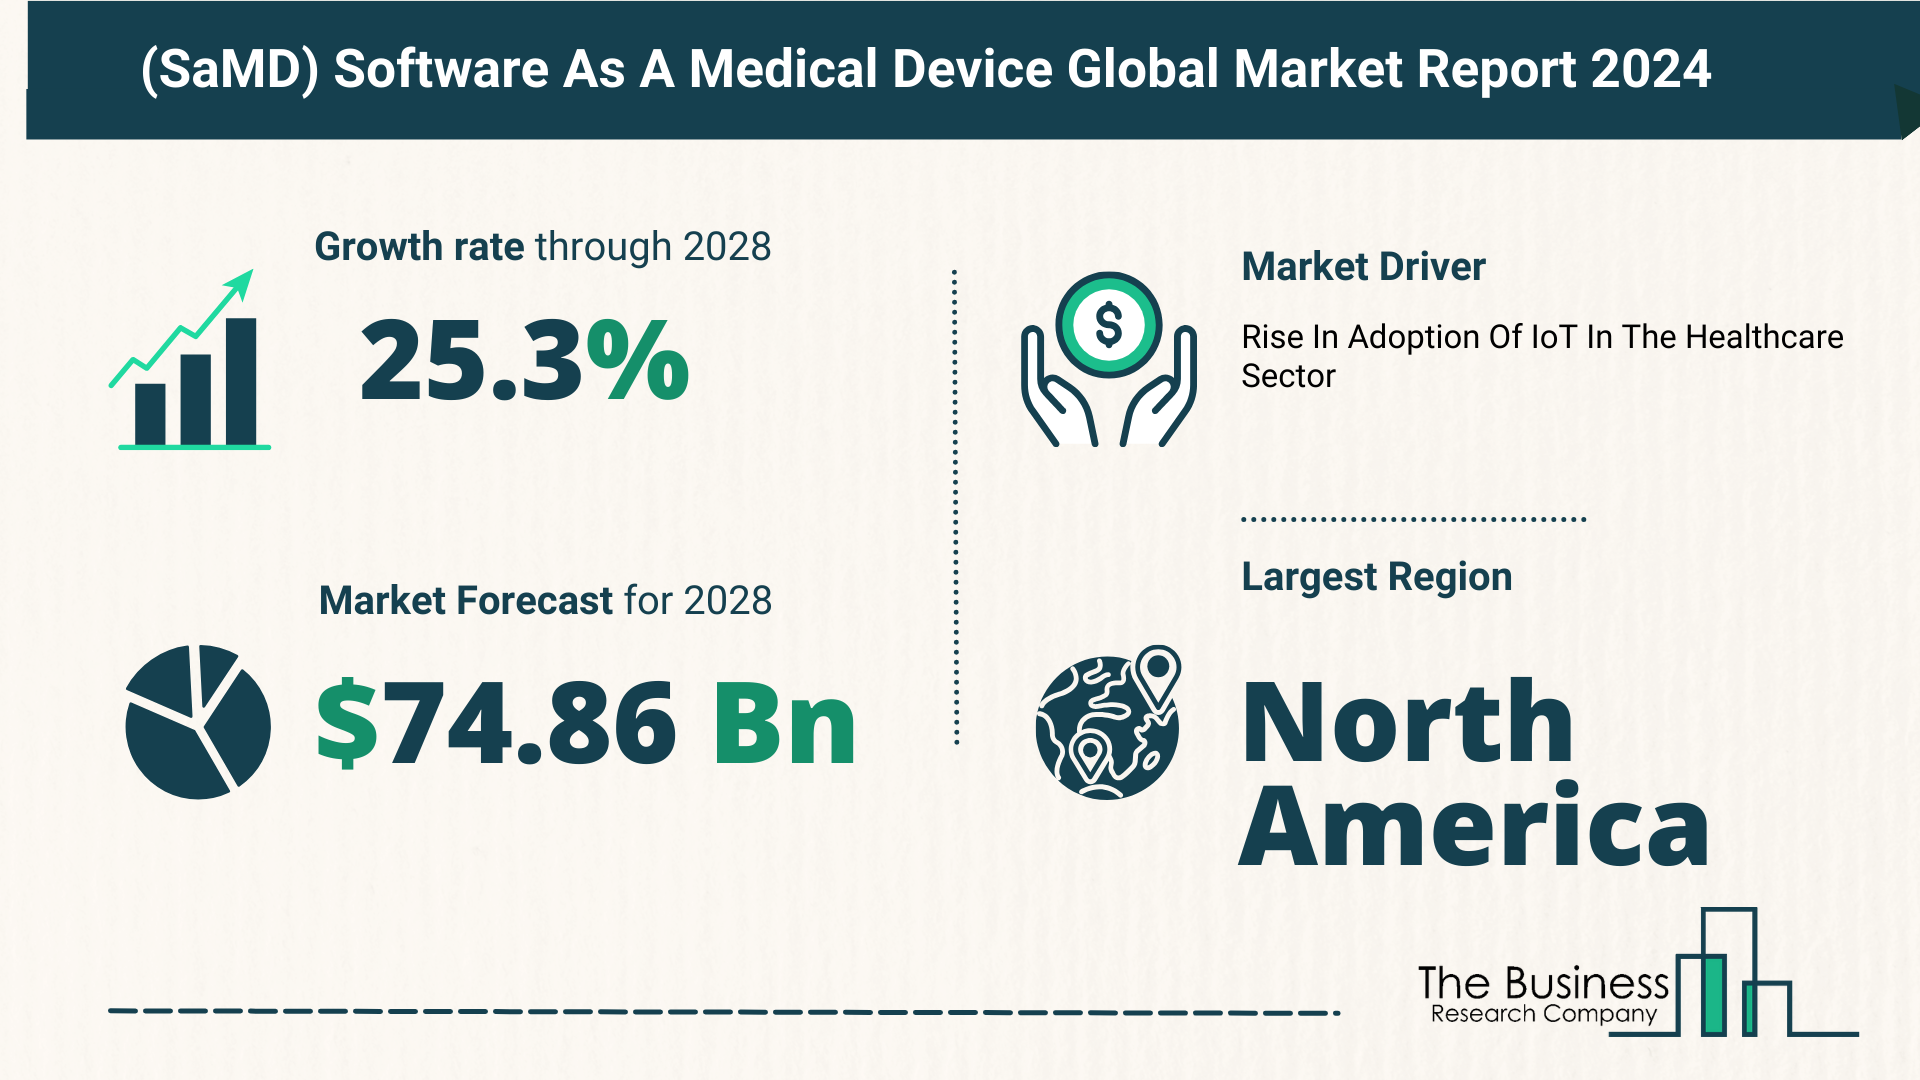 Global (SaMD) Software As A Medical Device Market